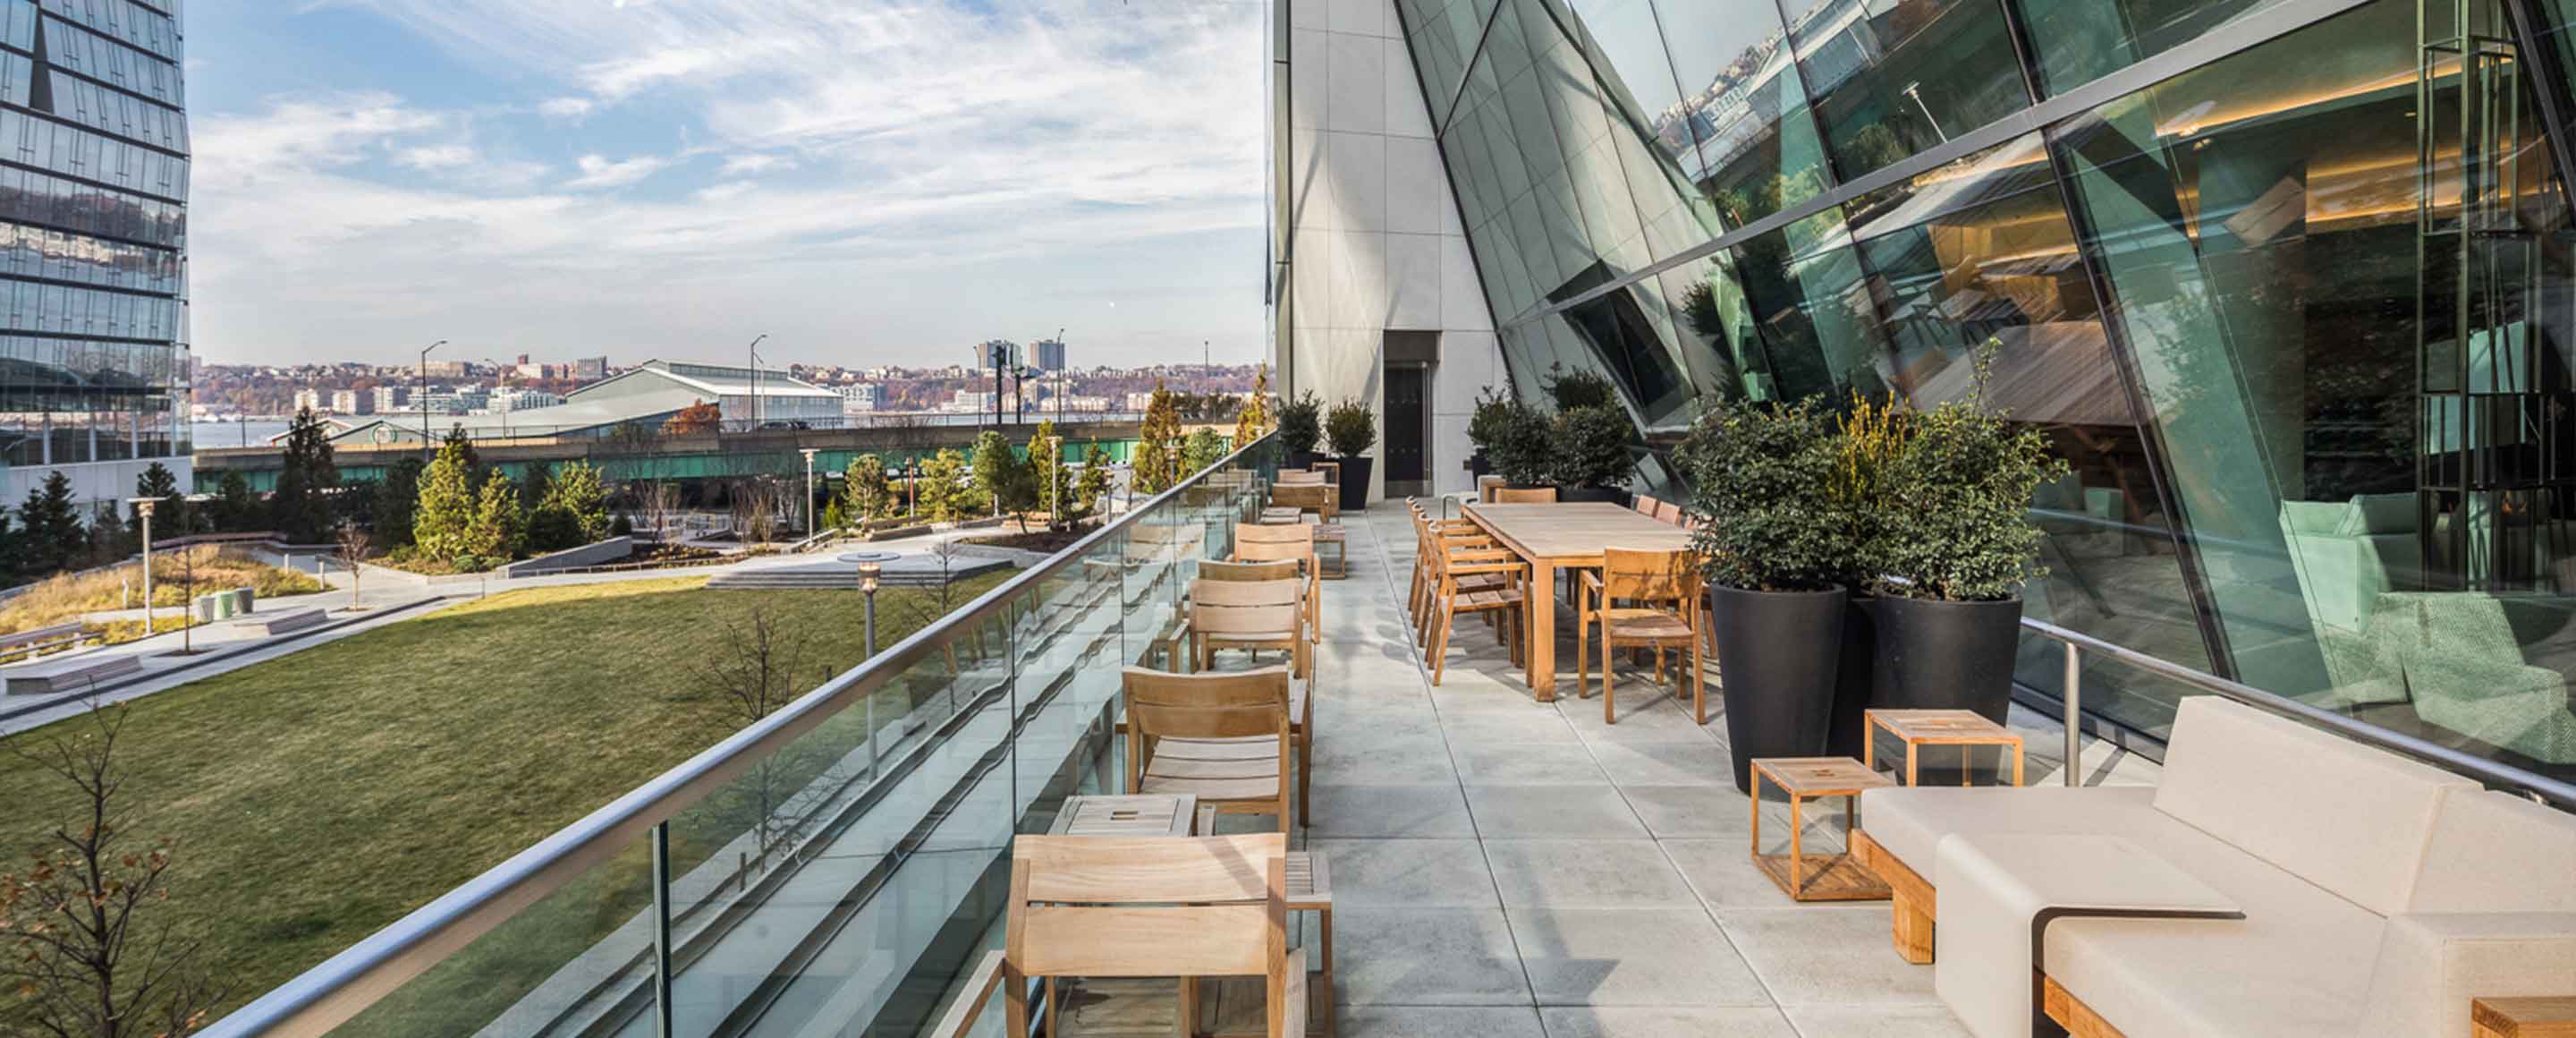 An urban oasis: a sleek terrace with modern wooden furniture overlooking a cityscape, bordered by contemporary glass architecture that reflects the sky and surroundings.